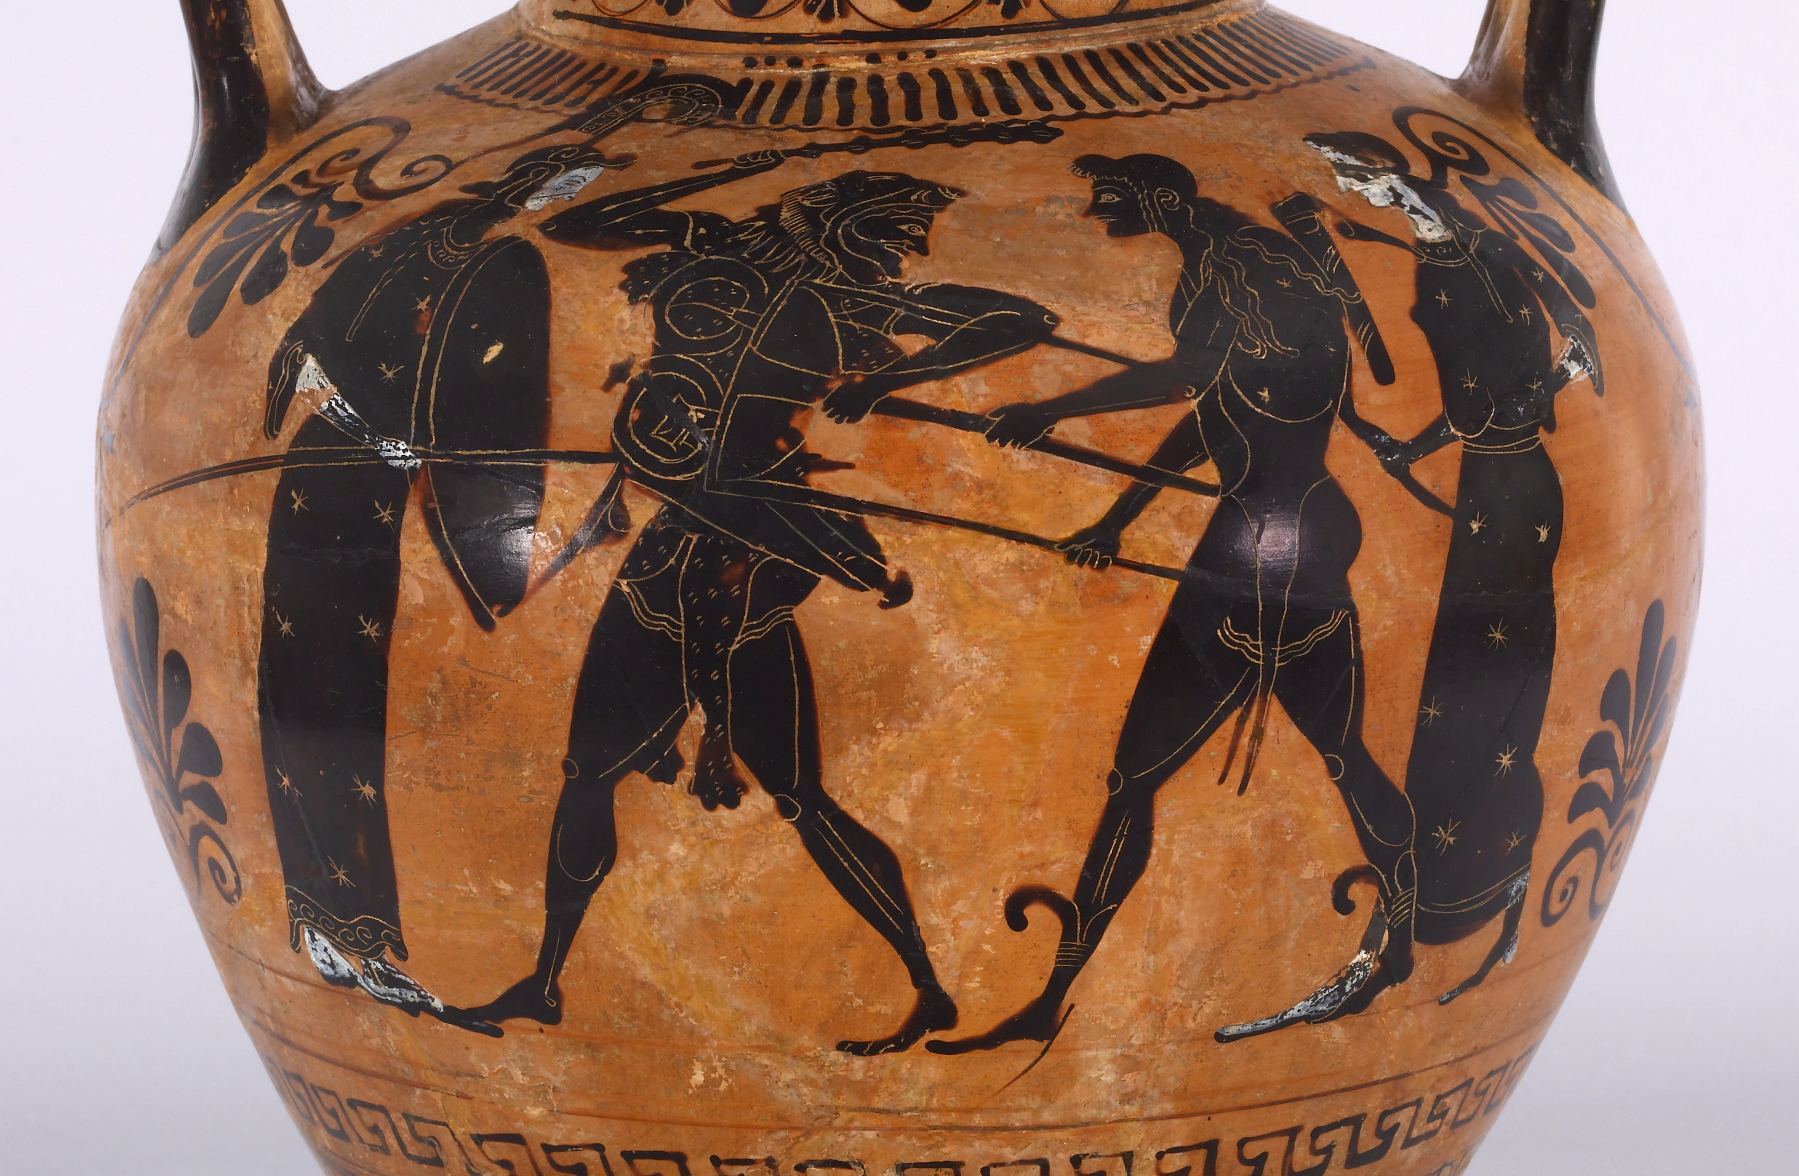 Herakles, dressed in a lion skin and wielding a club, plays tug-of-war with Apollo over the tripod. Apollo is nude and youthful with long hair. Behind Heracles stands Athena, with helm, shield, and spear, and behind Apollo stands Artemis with a bow.